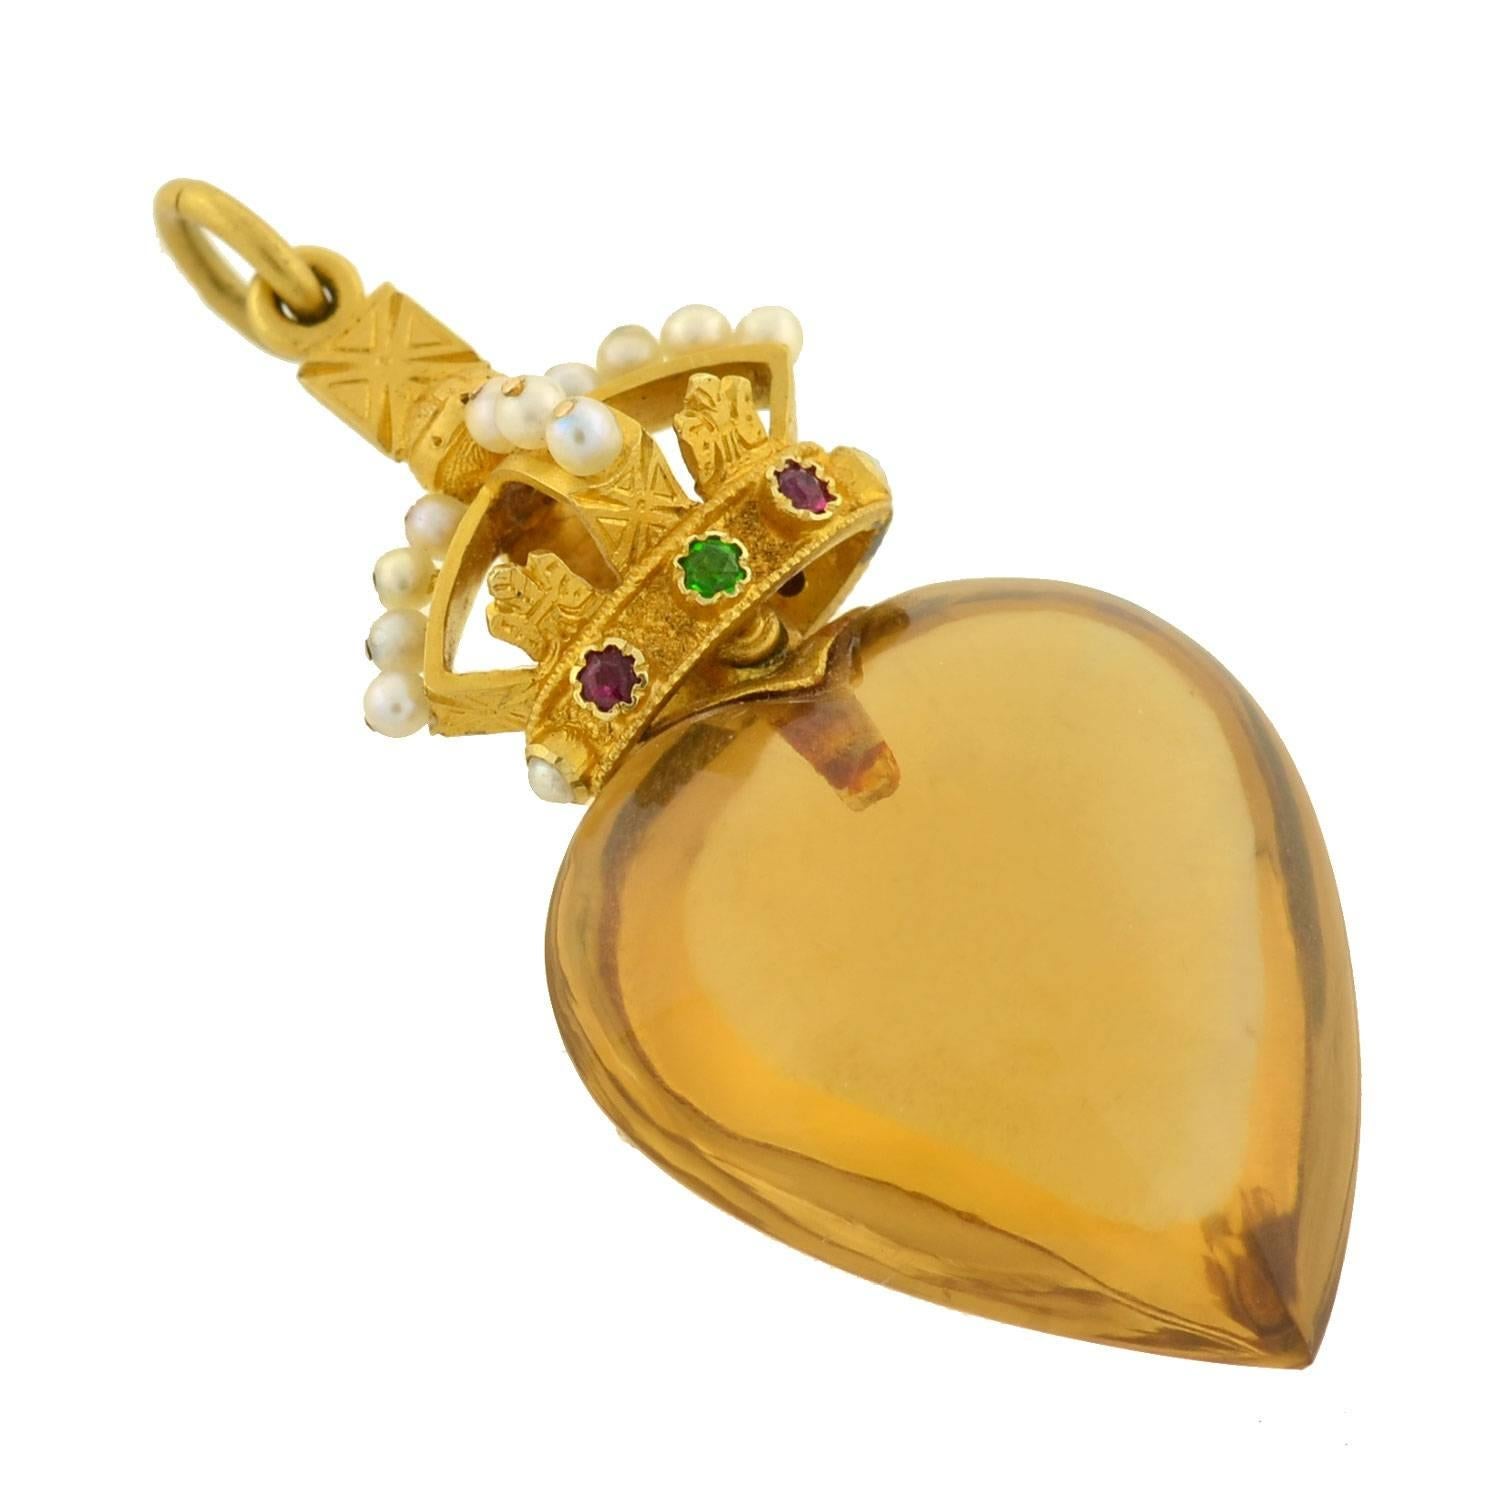 An absolutely fabulous and unusual Queen's Heart citrine and pearl pendant from the late Victorian (ca1900) era! This stunning royal piece is comprised of a single citrine heart, which has a 3-dimensional look and is fairly large in size. Riveted